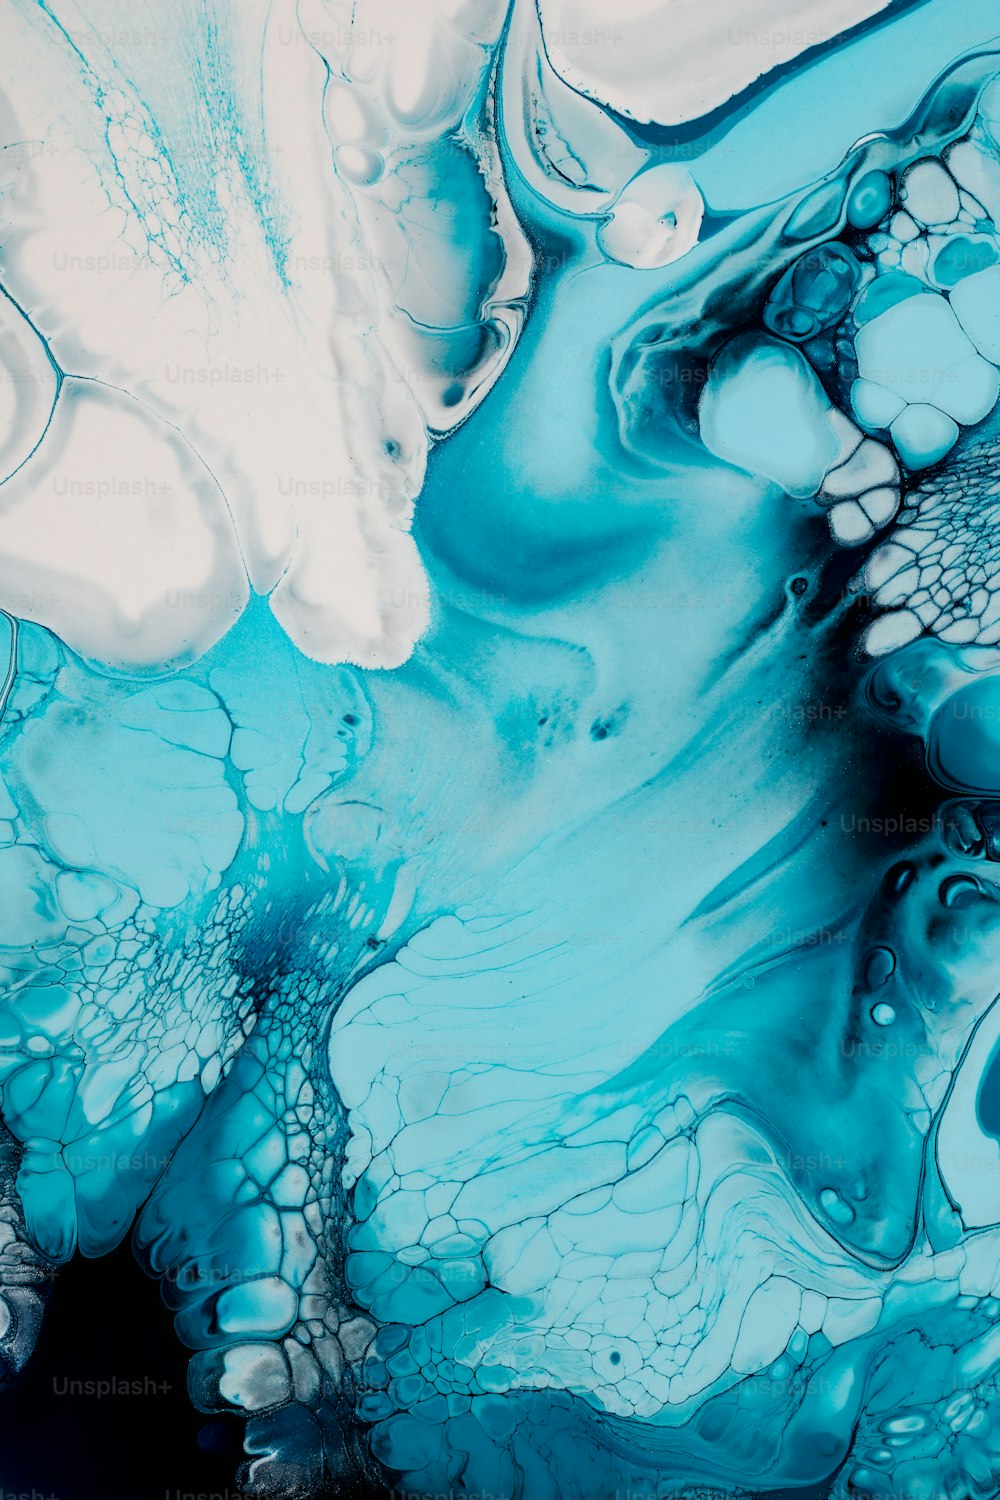 a close up of a blue and white substance